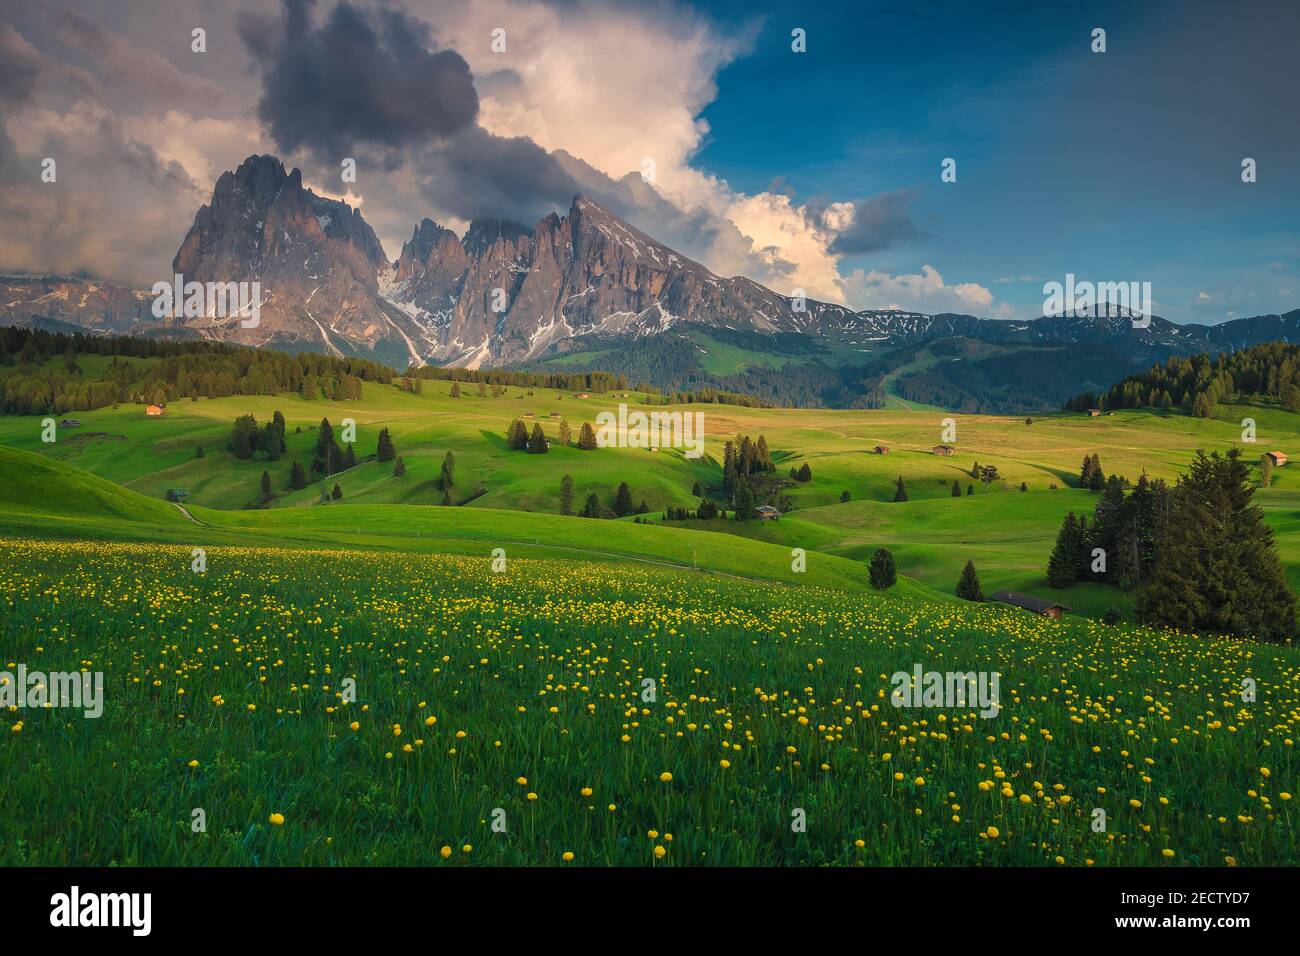 Stunning summer scenery with yellow globeflowers (trollius) on the green fields and snowy mountains in background, Alpe di Siusi, Dolomites, Italy, Eu Stock Photo